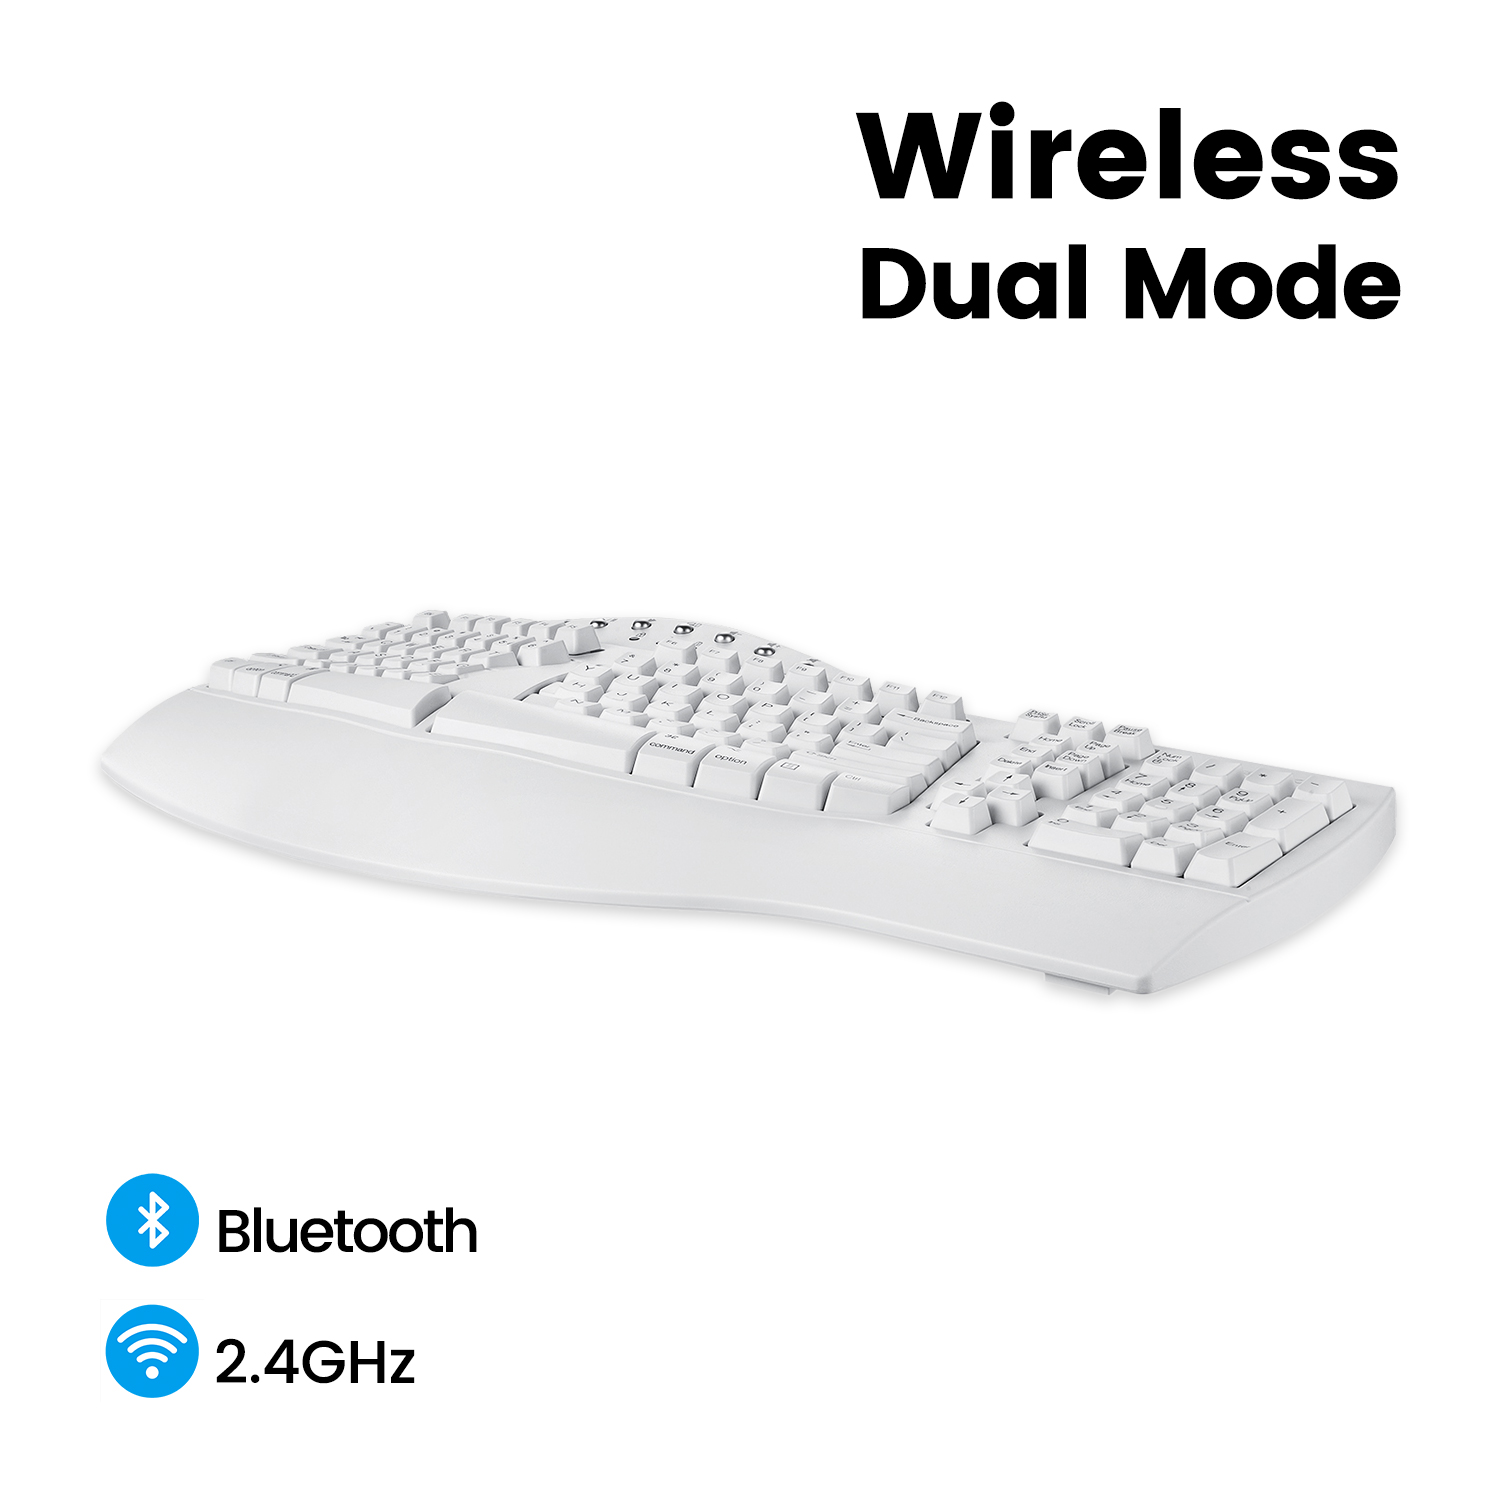 Dual Mode between 2.4GHz and Bluetooth 4.0